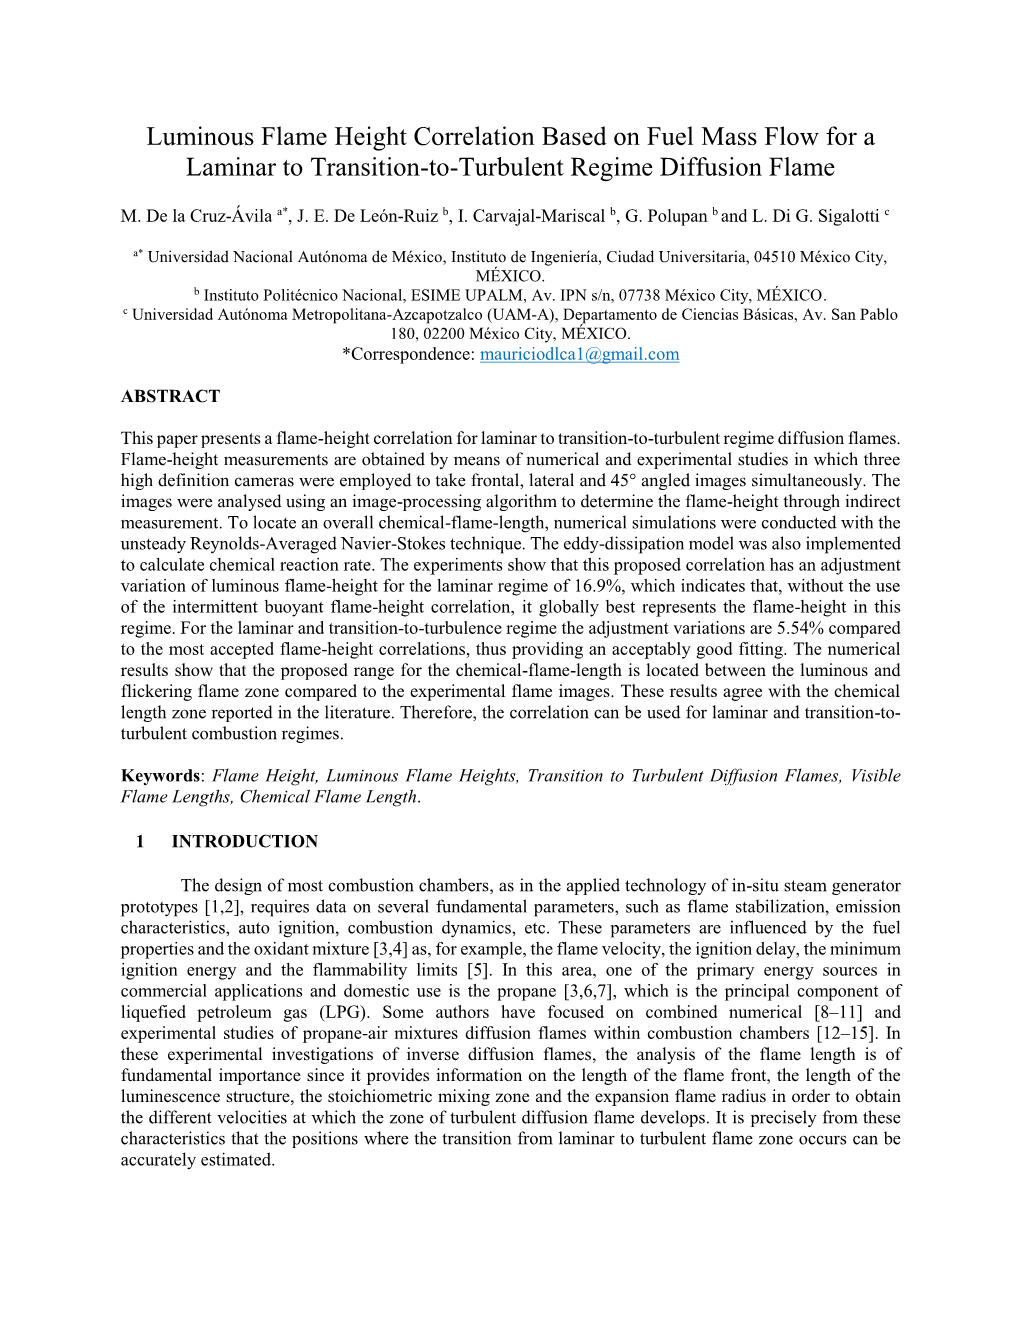 Luminous Flame Height Correlation Based on Fuel Mass Flow for a Laminar to Transition-To-Turbulent Regime Diffusion Flame